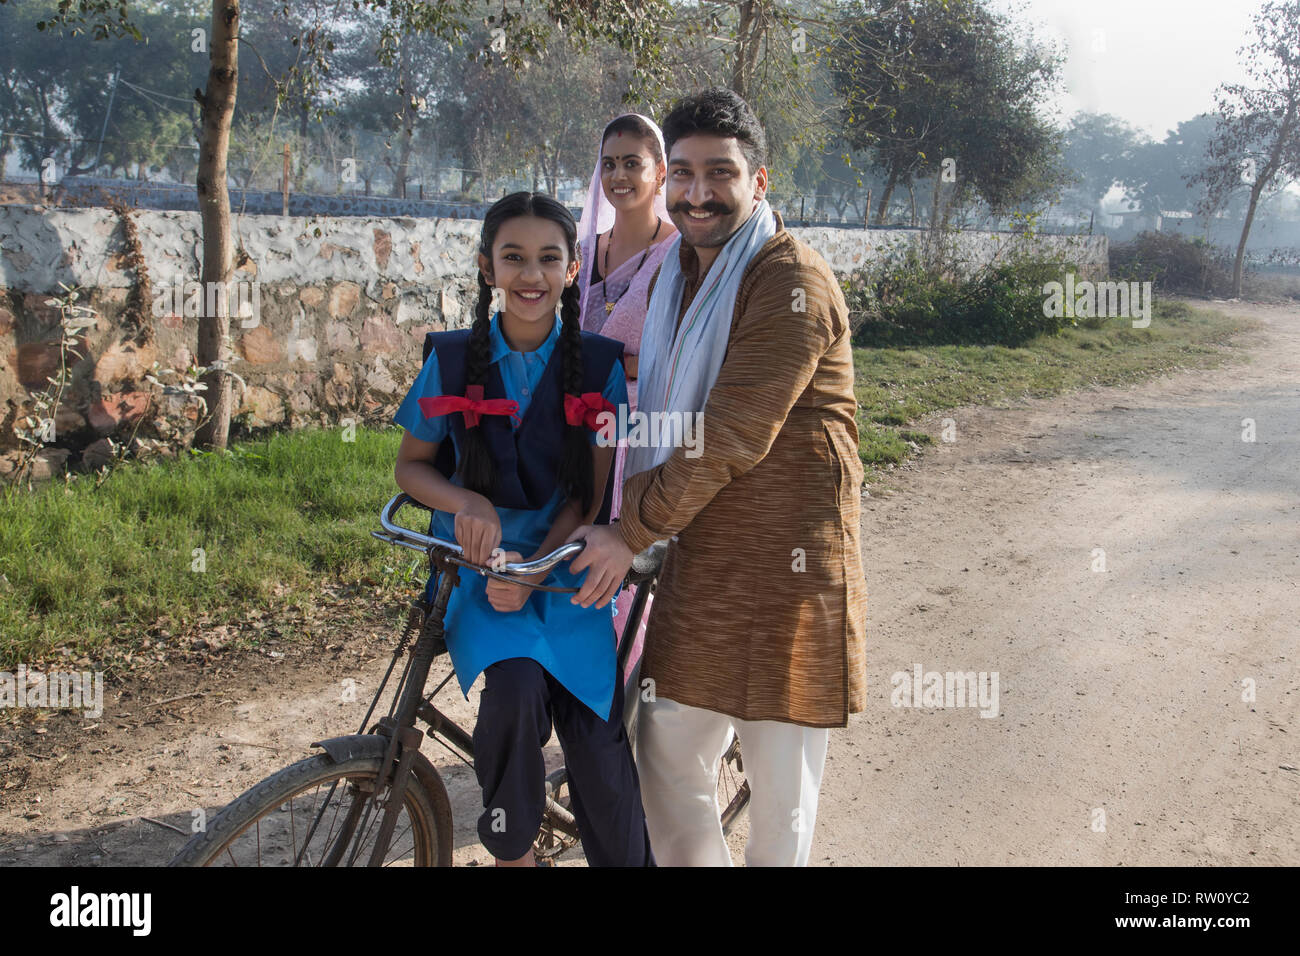 Happy rural family consisting of man, woman and a school going girl walking on street in a village. Stock Photo